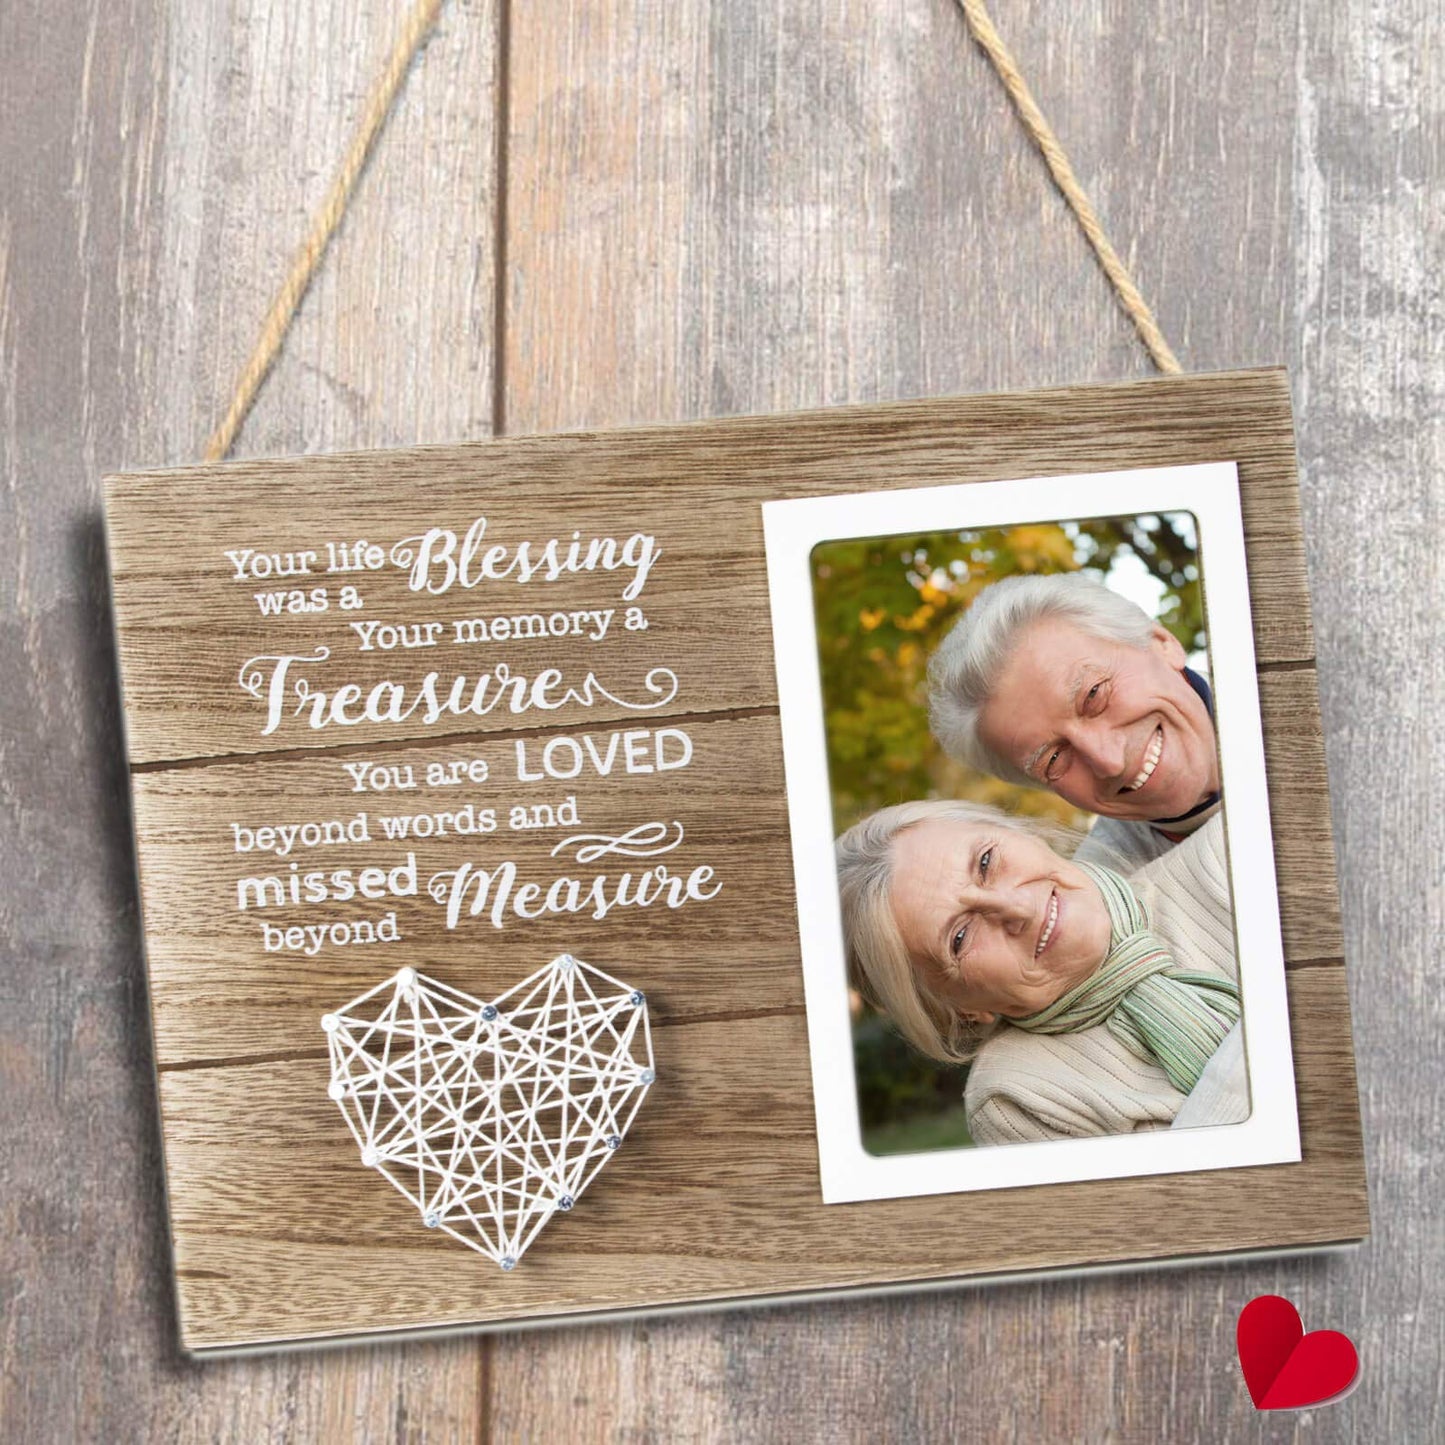 VILIGHT Memorial Picture Frame Sympathy Gifts for Loss of Loved One - Remembrance and Bereavement Present - 4x6 Photo